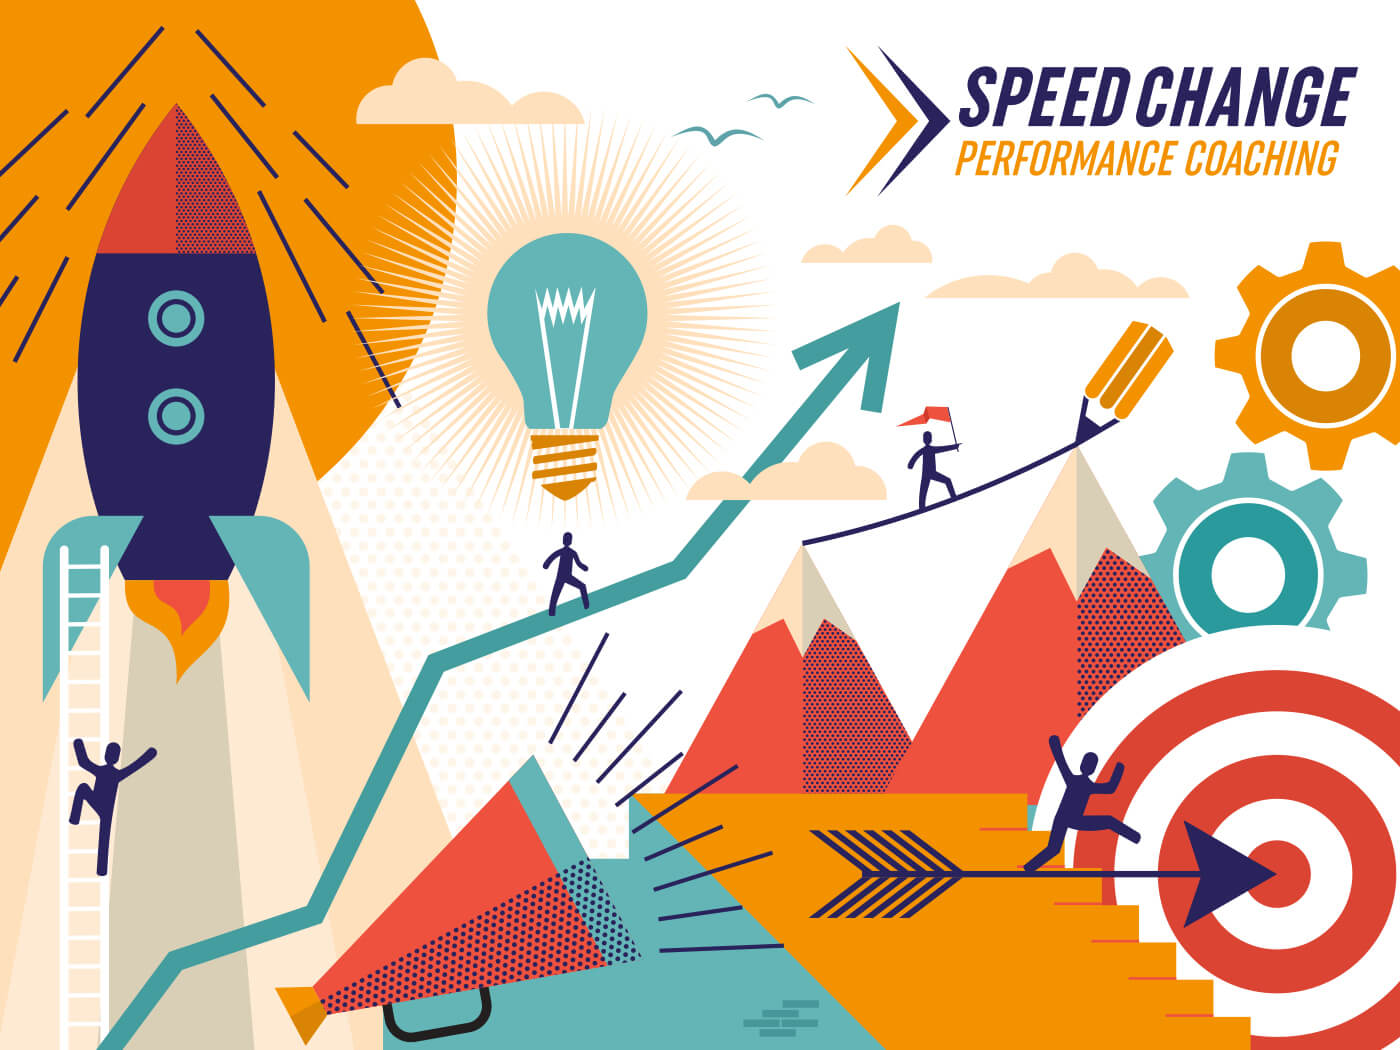 SpeedChange Performance Coaching - How to Achieve Our Full Potential